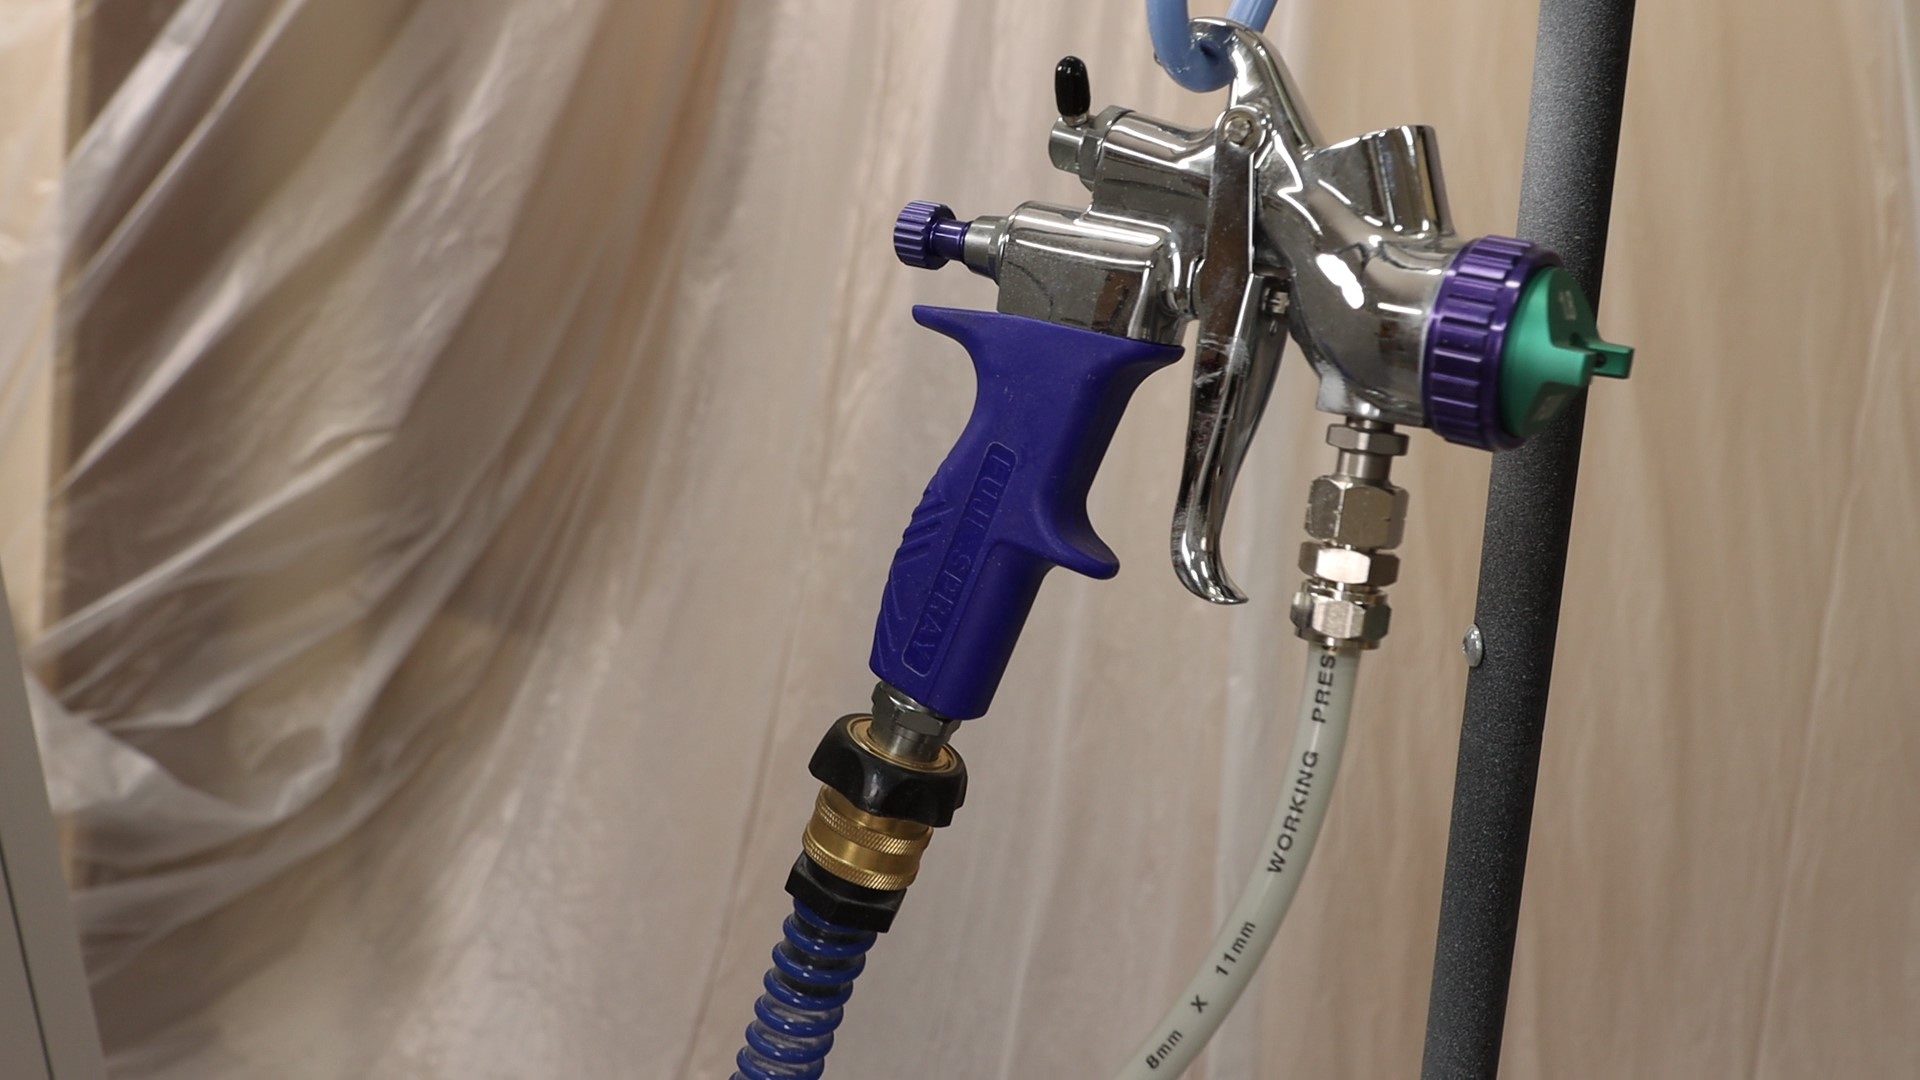 Fuji Spray T70 being hung on a hook